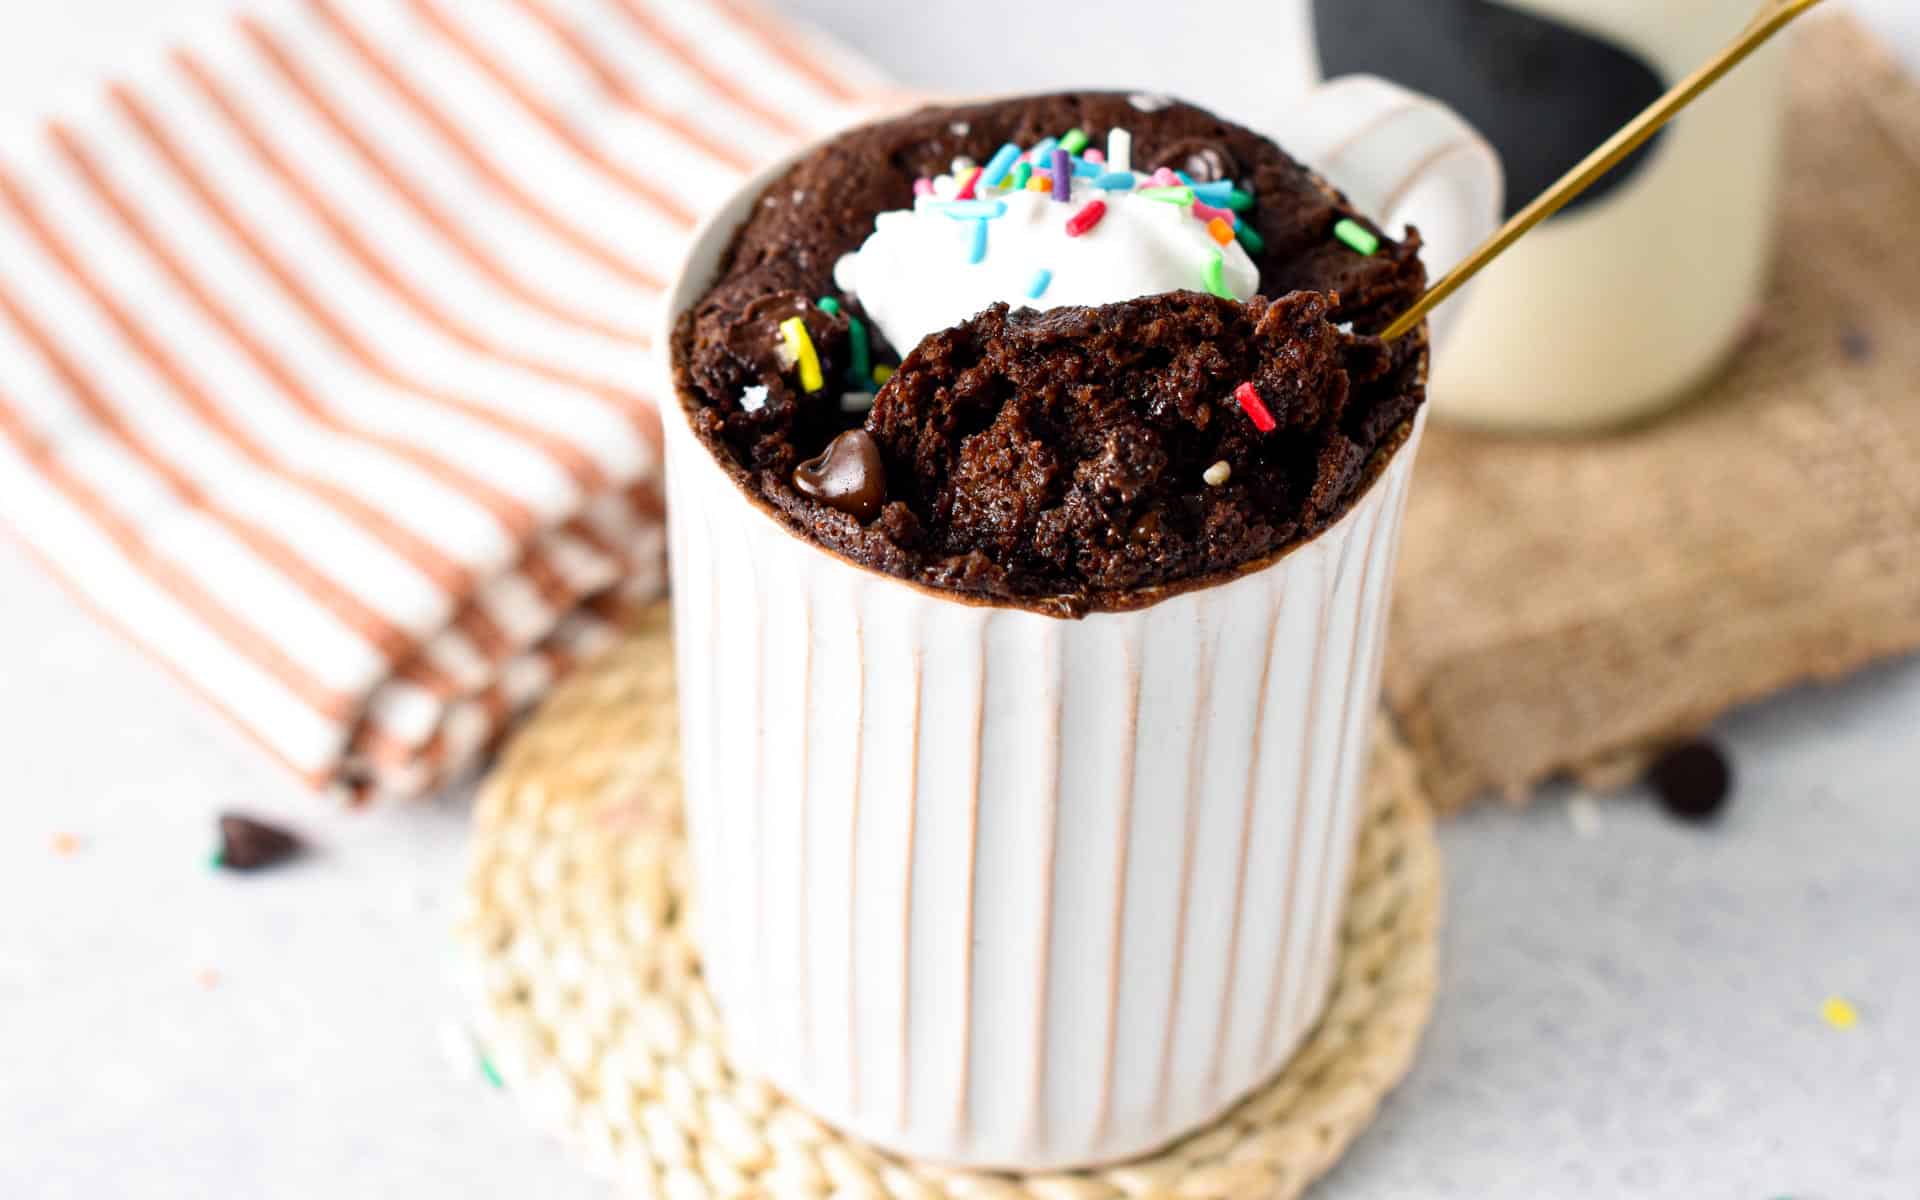 This Vegan Gluten-free Mug Cake recipe is a delicious single serve chocolate cake baked in your microwave in 90 seconds to fix your sweet tooth. Plus, this is a vegan oil-free mug cake too, perfect if you are looking for oil-free baking recipe.